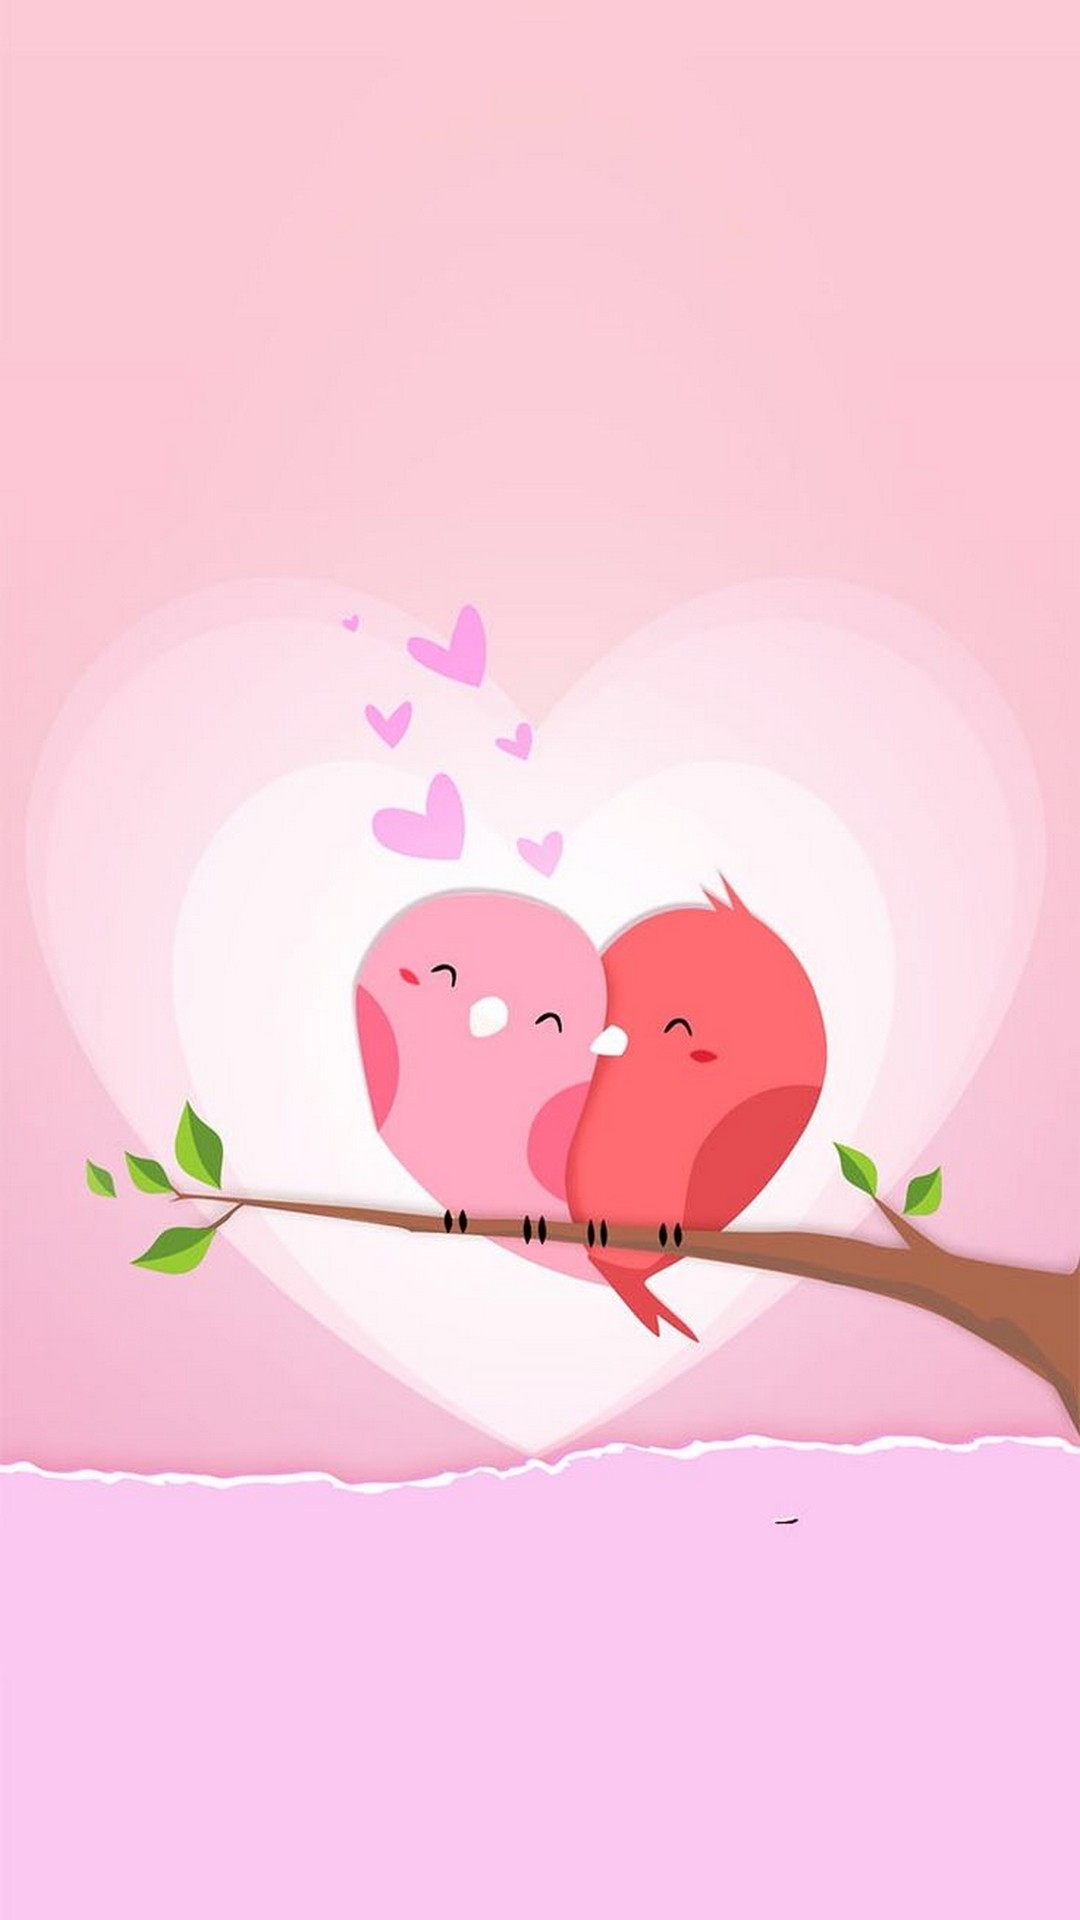 Romantic Images Of Valentines Day iPhone Wallpaper